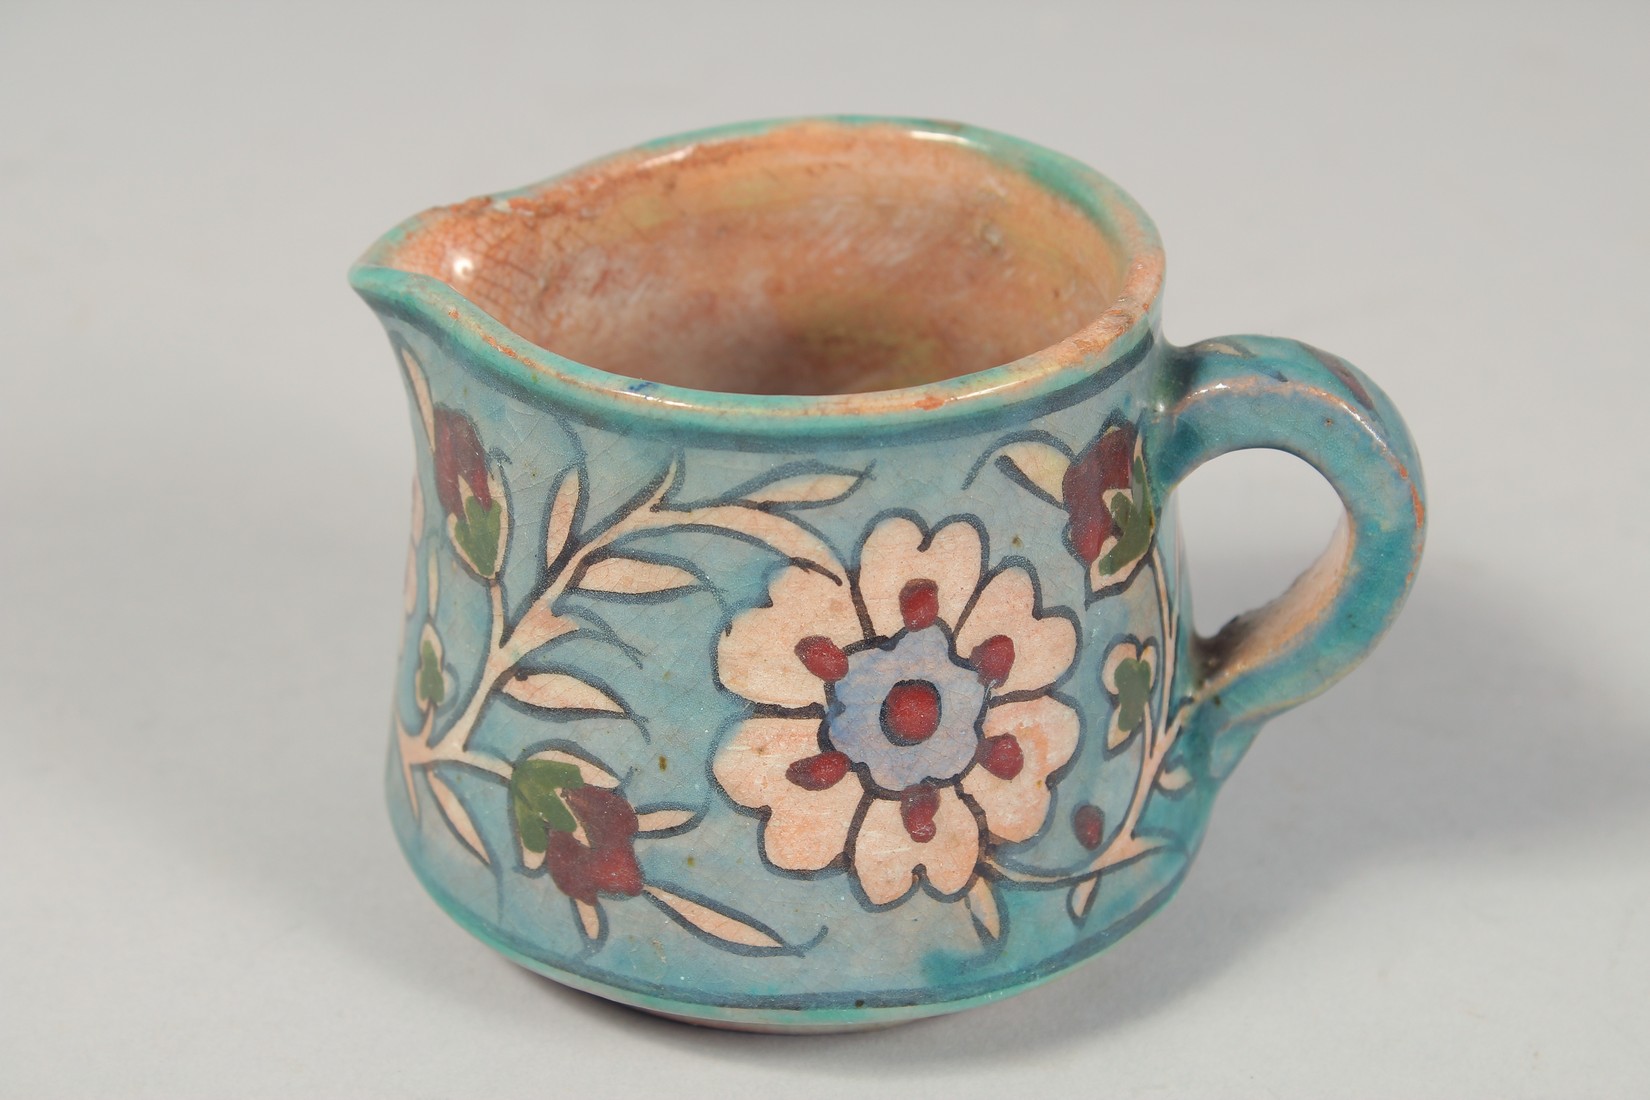 A PALESTINIAN TURQUOISE GLAZE POTTERY PART TEA SET, each piece painted with floral decoration, - Image 7 of 10